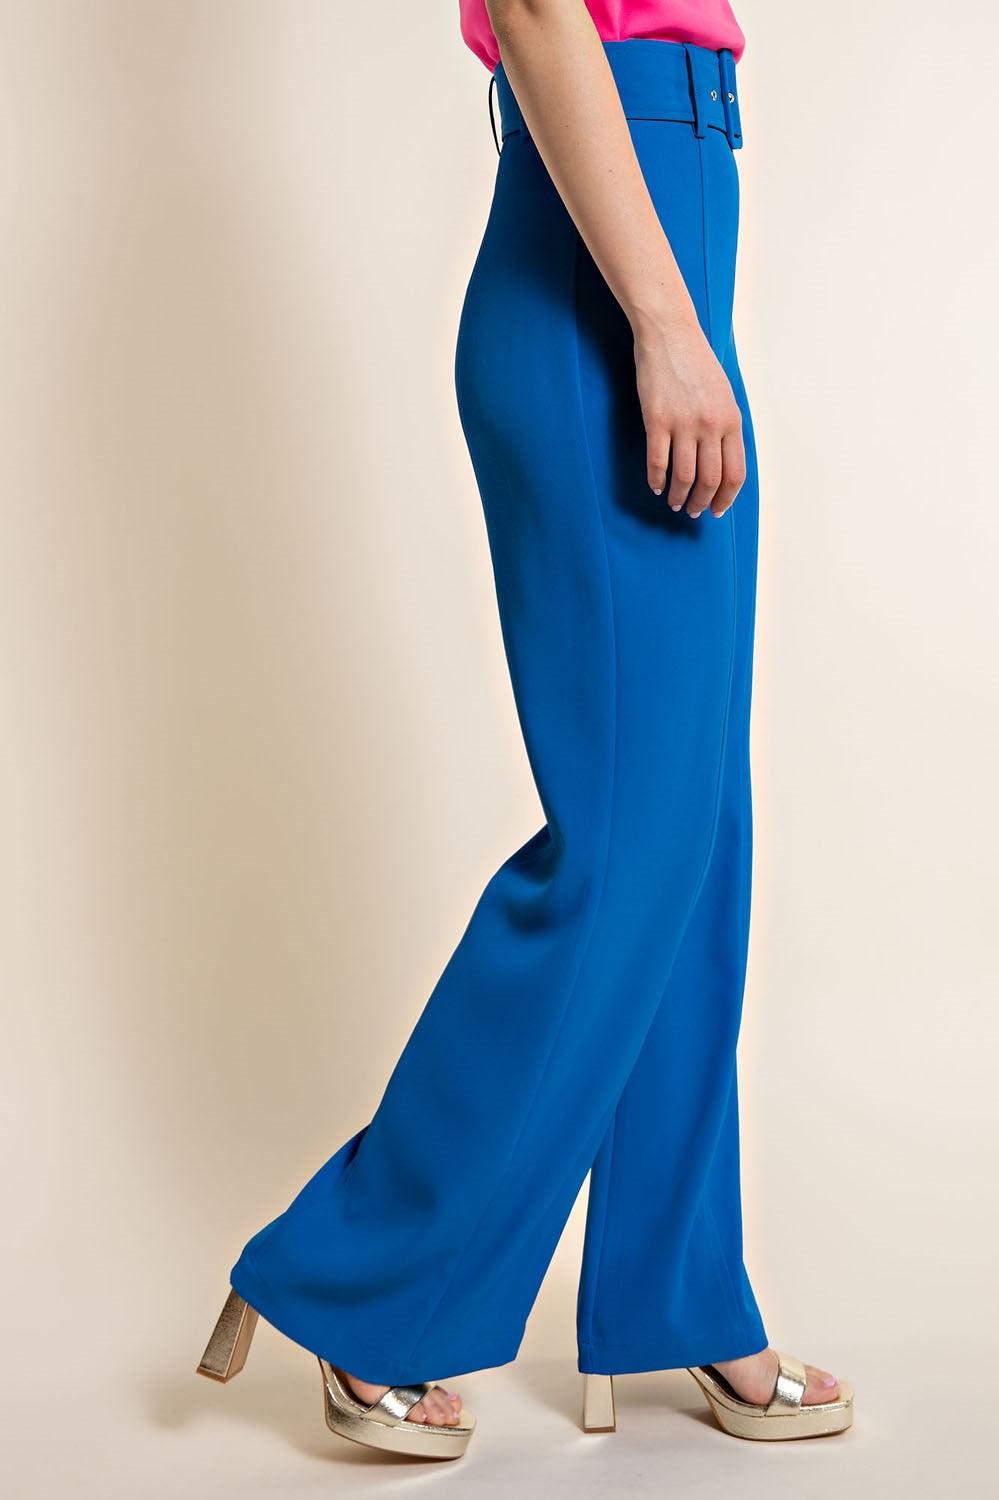 Belted High Waist Wide Leg Pants - RK Collections Boutique